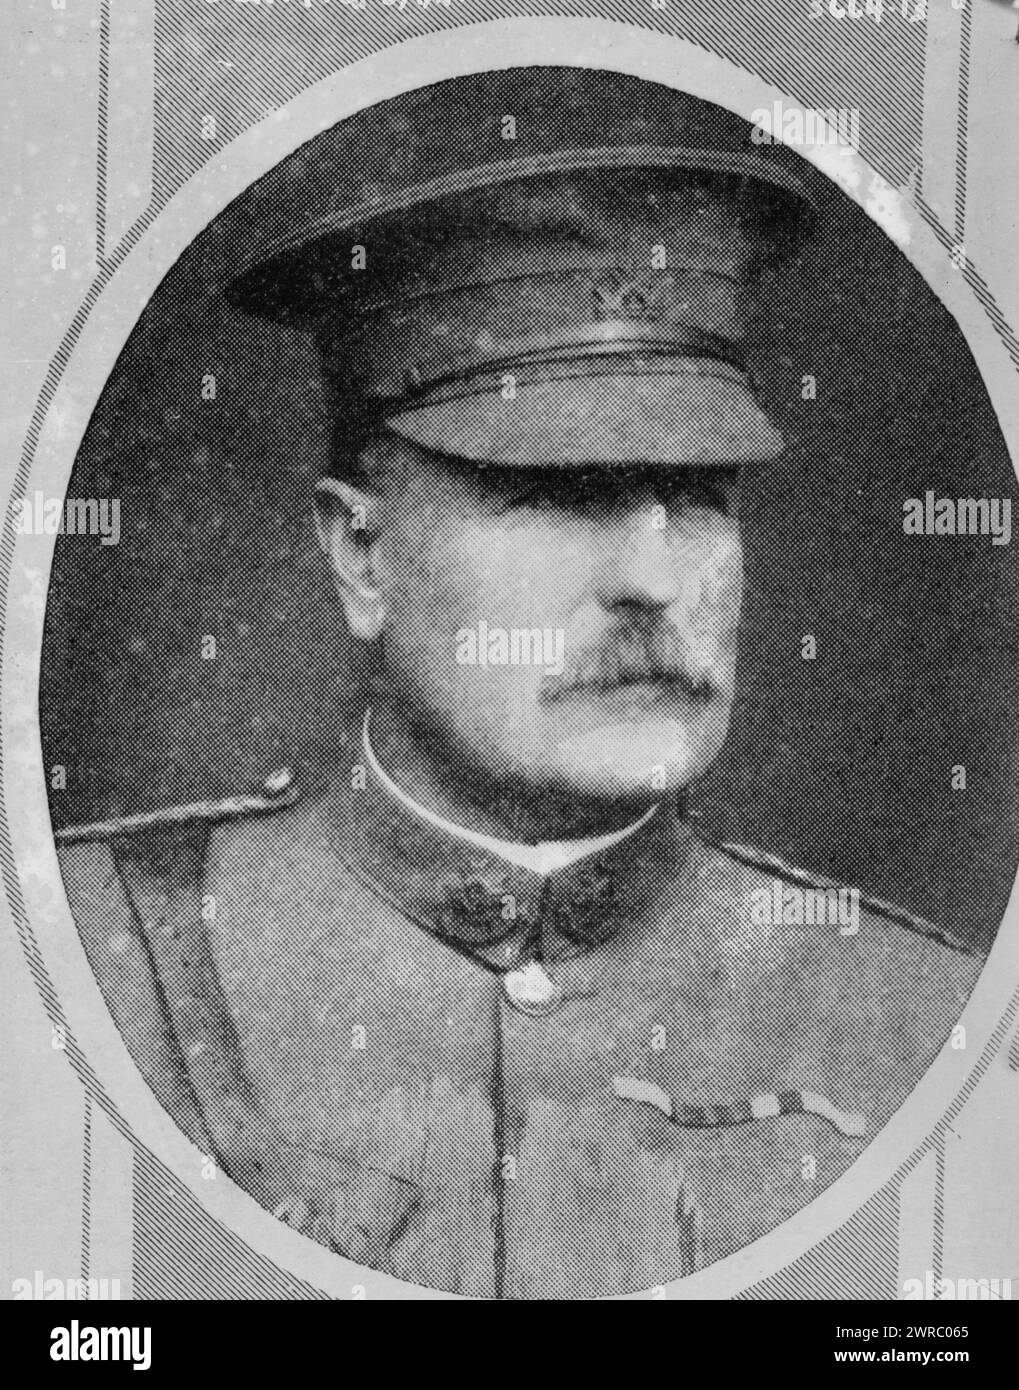 Gen. F.C. Shaw, Photograph shows Lieutenant General Sir Frederick Charles Shaw (1861-1942), a British Army general who served in the Boer War and the First World War., between ca. 1910 and ca. 1915, Glass negatives, 1 negative: glass Stock Photo